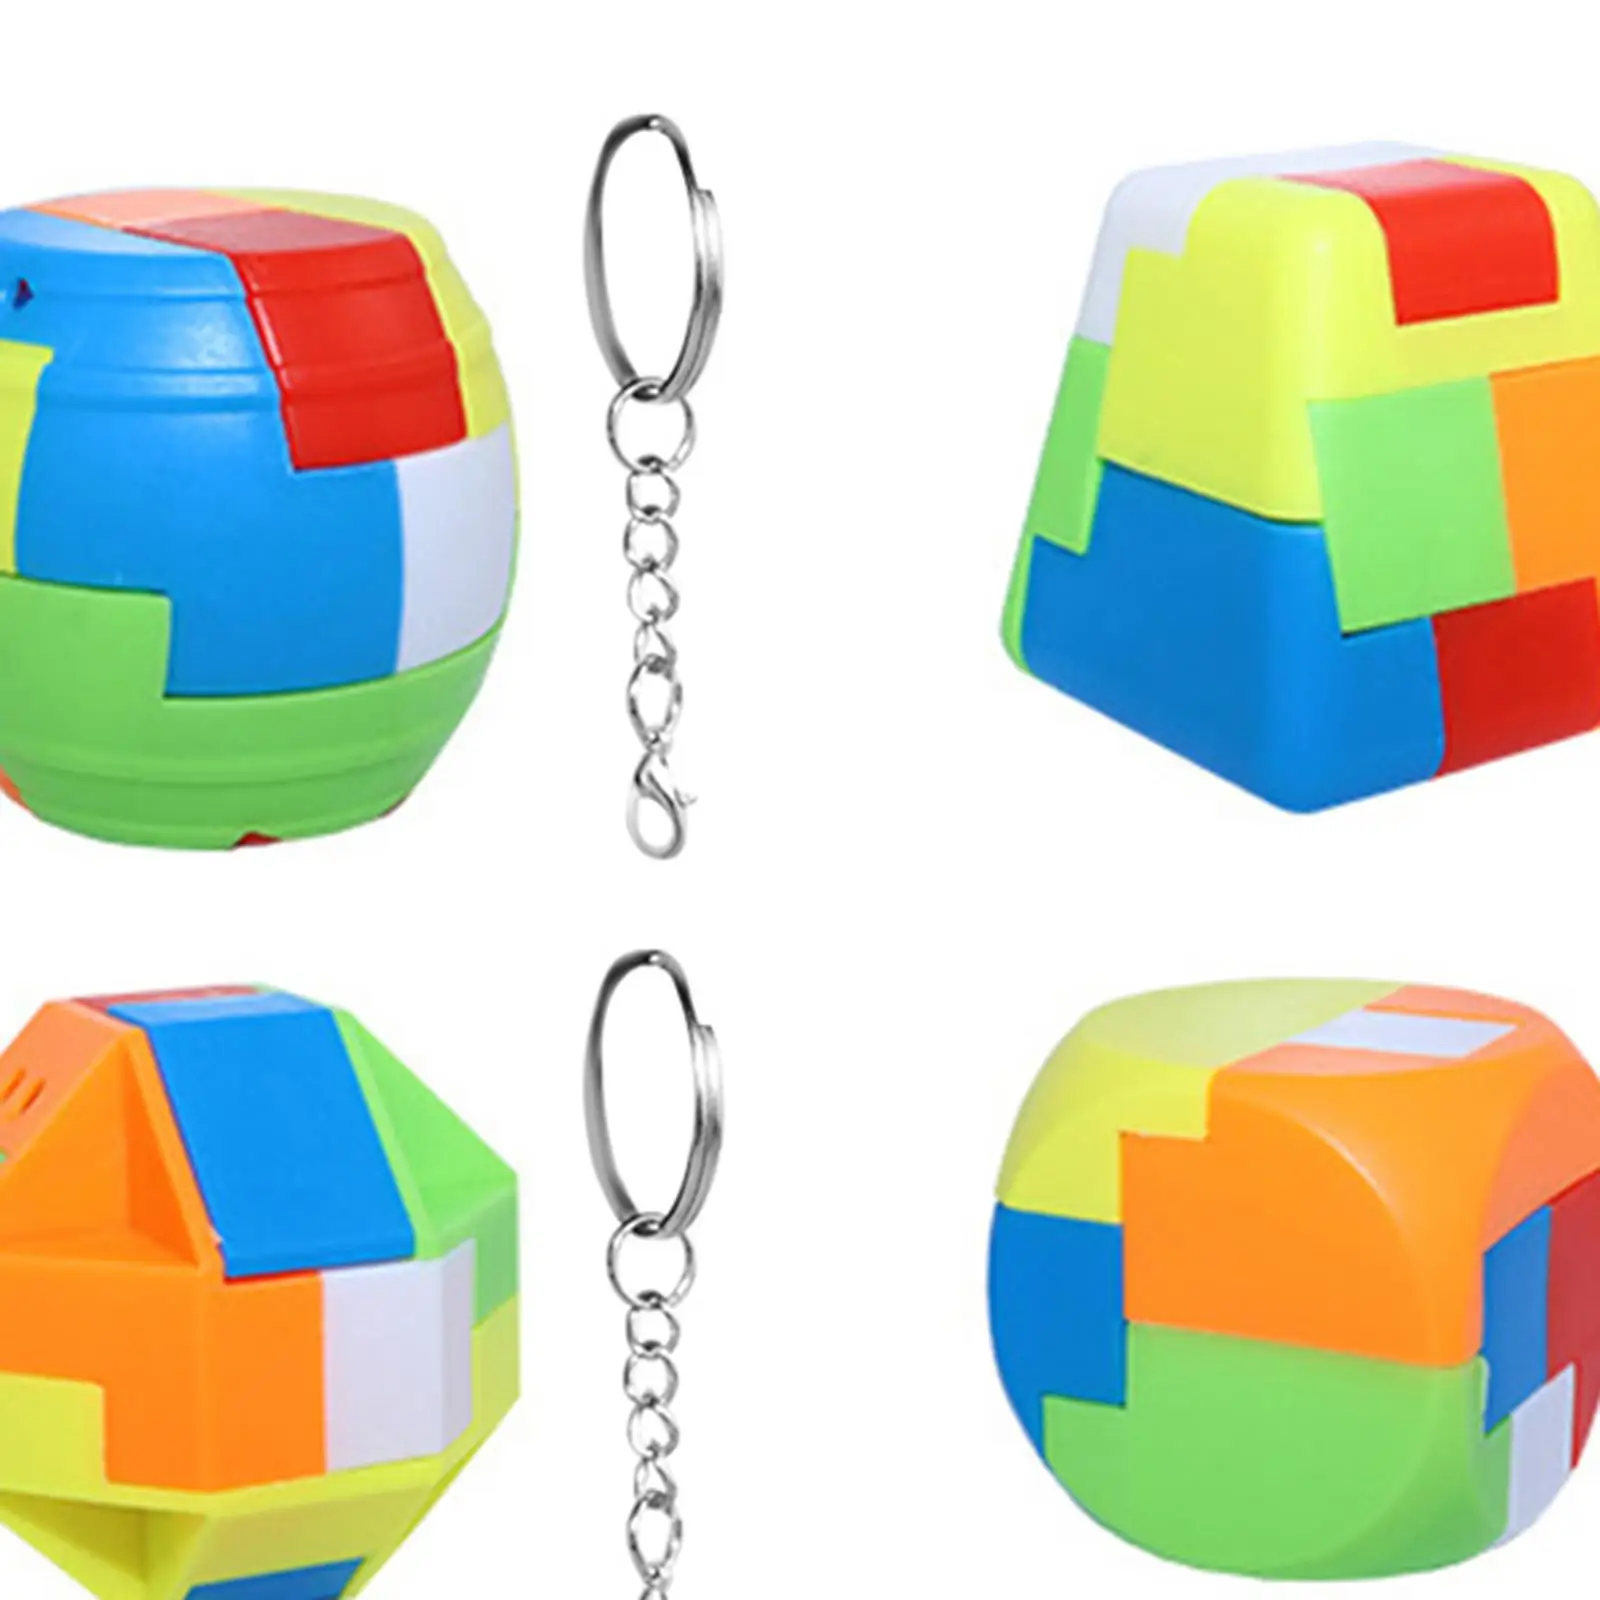 12Pcs 3D Puzzles Lock Toy Mind Games Brain Teaser for Birthday Gifts